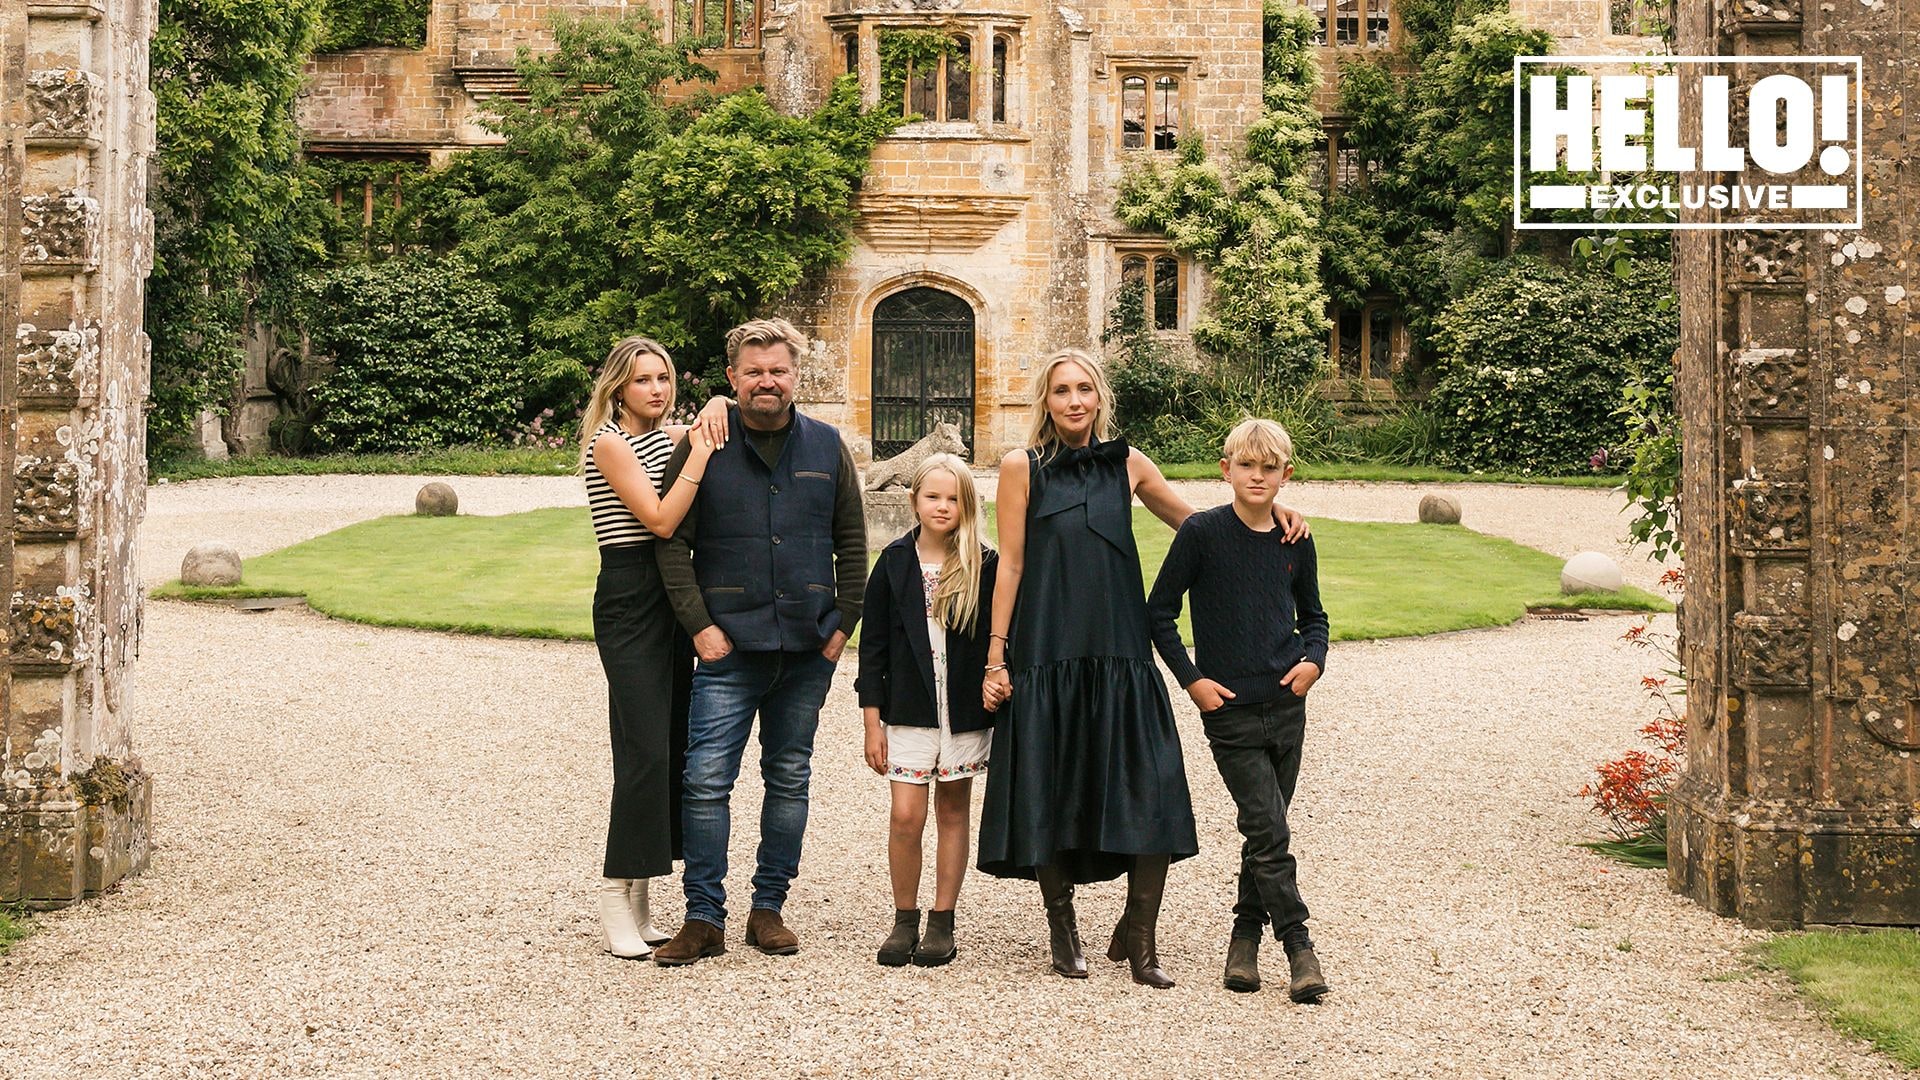 Parnham Park owners James and Sophie Perkins posing with their three children